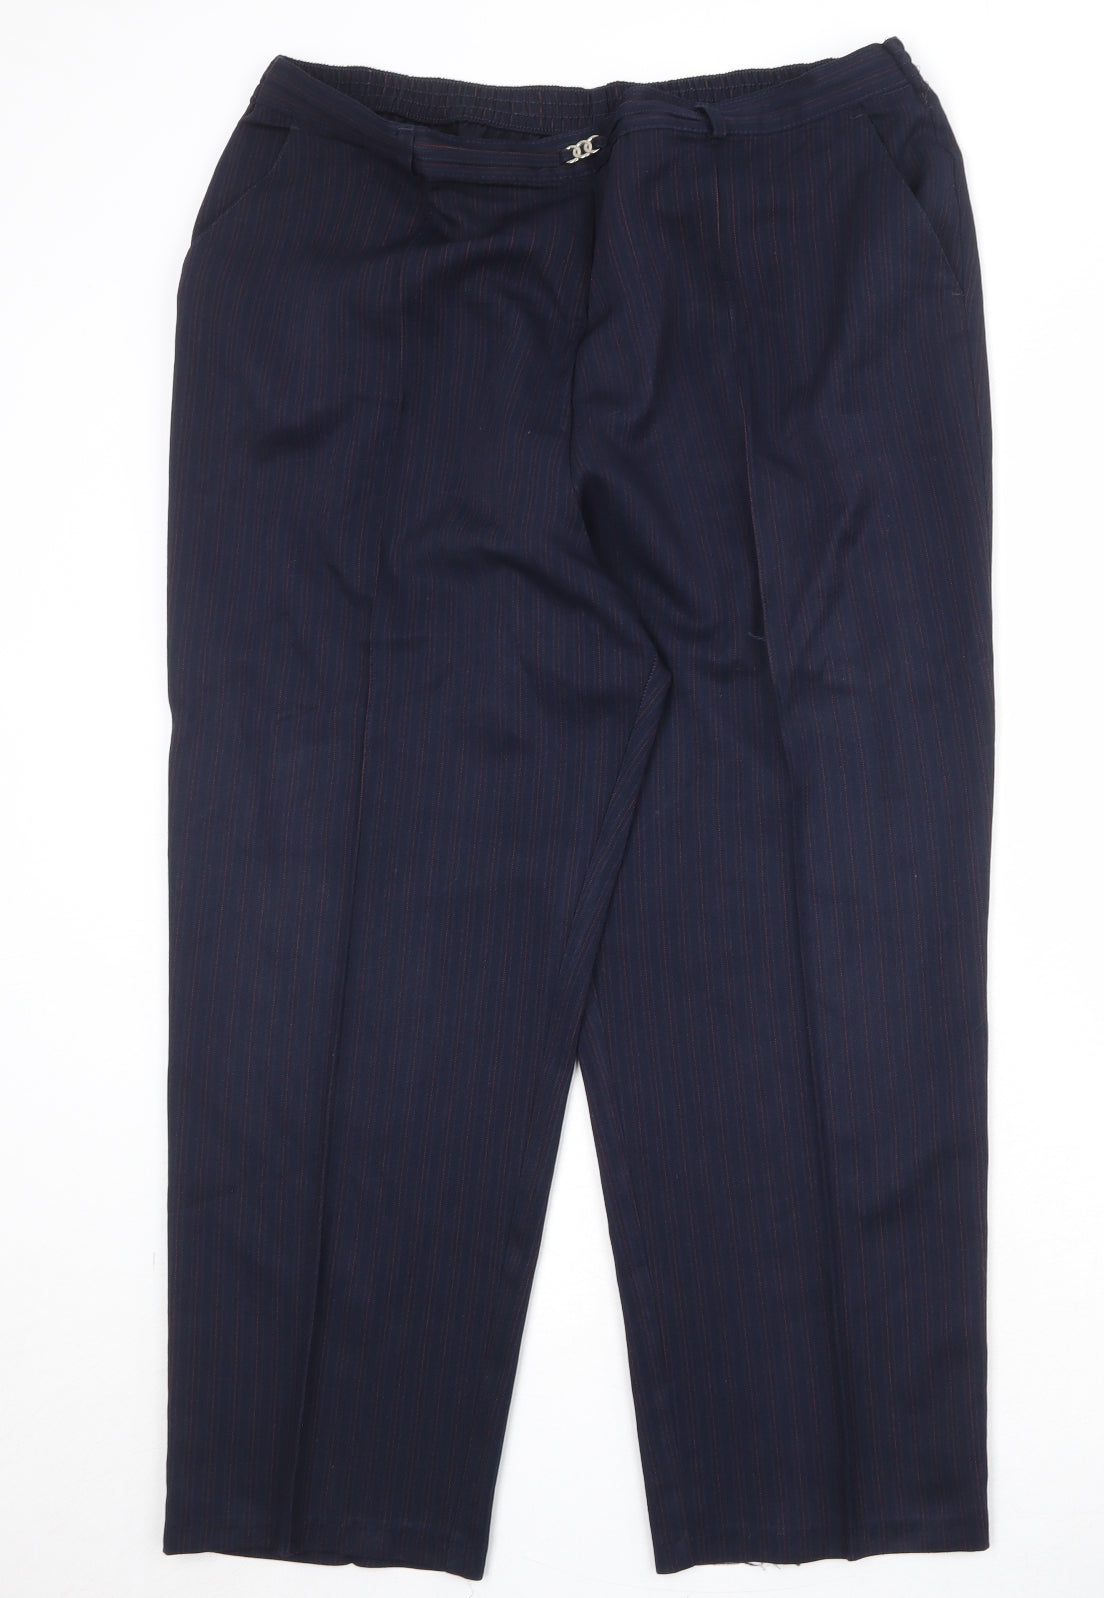 Marks and Spencer Womens Blue Striped Polyester Dress Pants Trousers Size 20 Regular